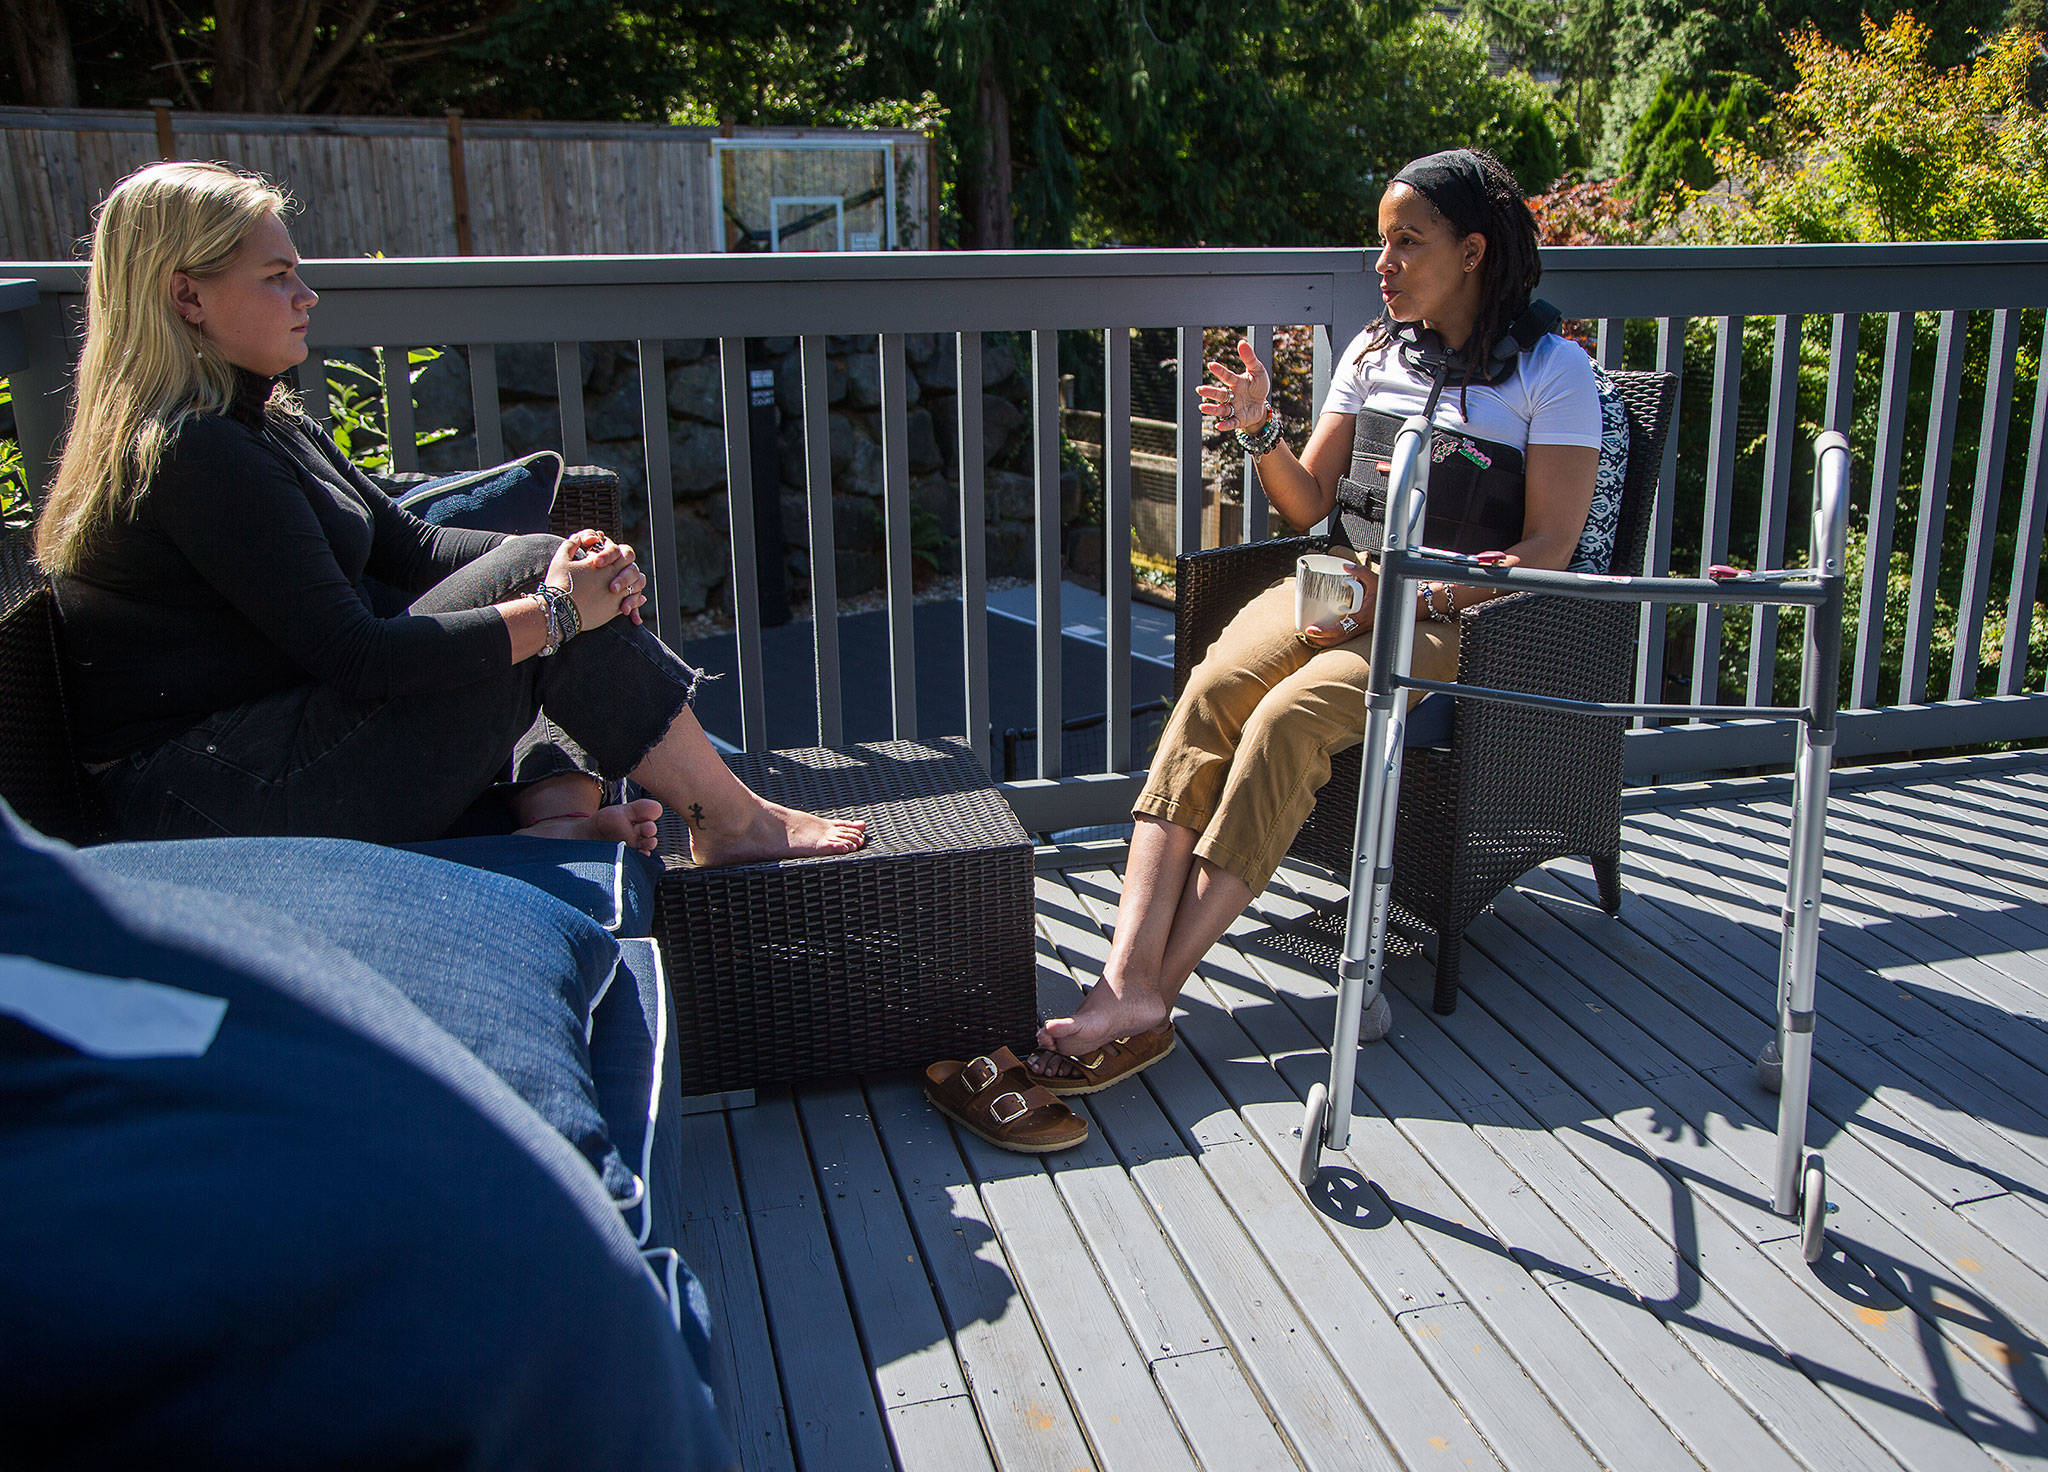 In a back brace and with her walker nearby, April Berg and her campaign manager, Katharine Gillen, chat Wednesday on the deck of Berg’s home in Mill Creek. Berg, a school board member and candidate for state office, suffered a broken back in an Election Day car crash. (Andy Bronson / The Herald)